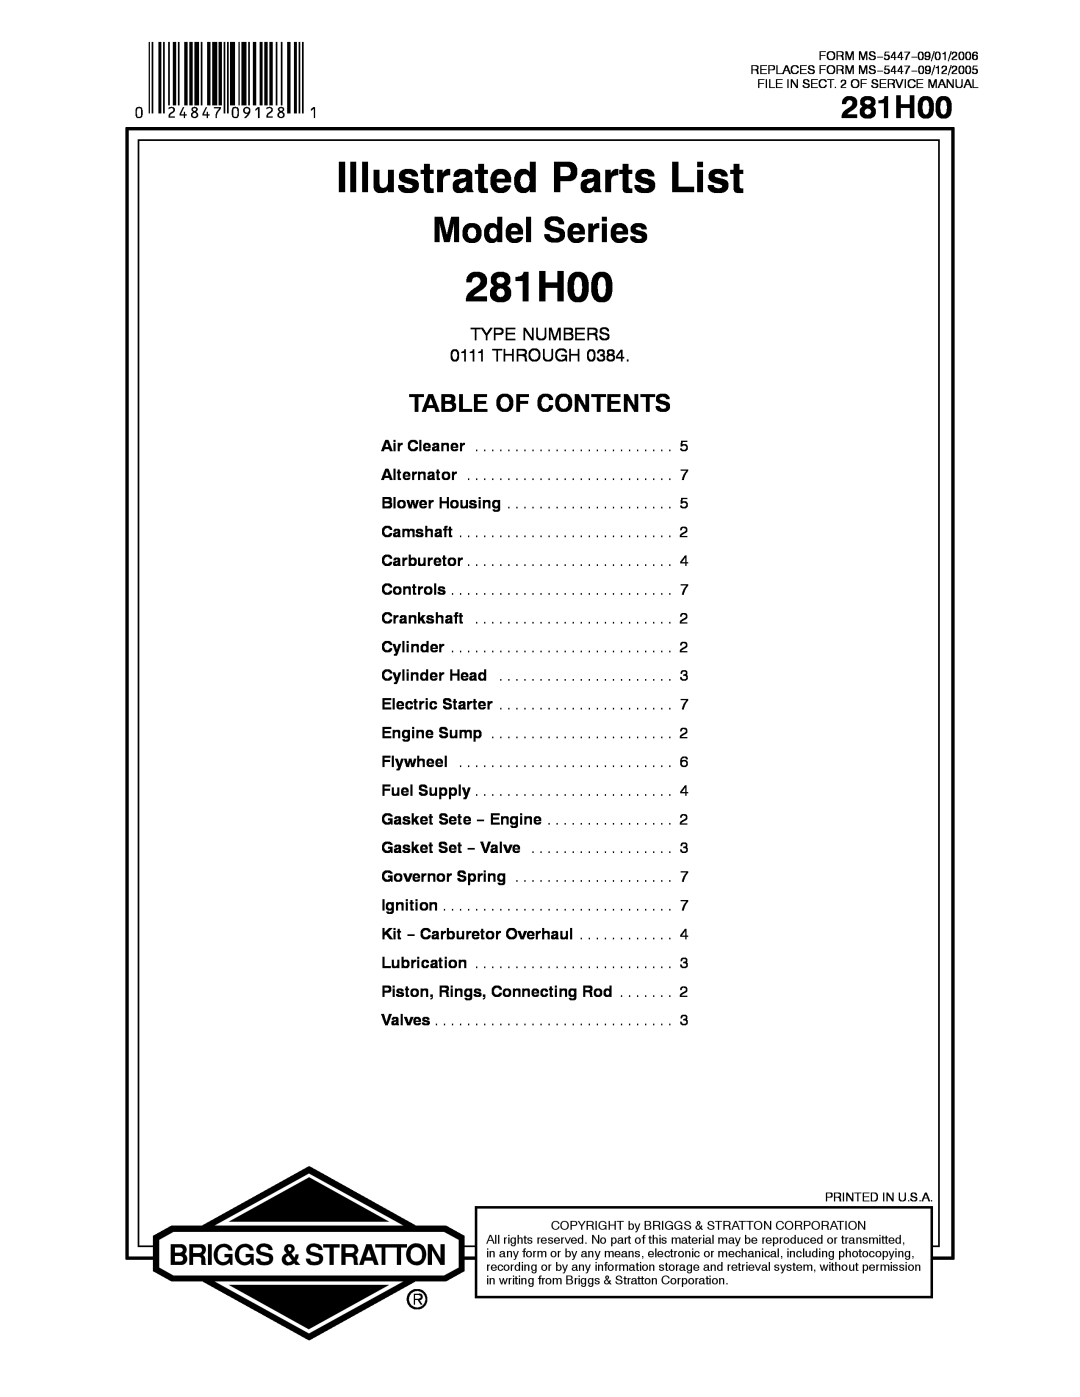 Briggs & Stratton 281H00 service manual Model Series, Illustrated Parts List, Table Of Contents, TYPE NUMBERS 0111 THROUGH 